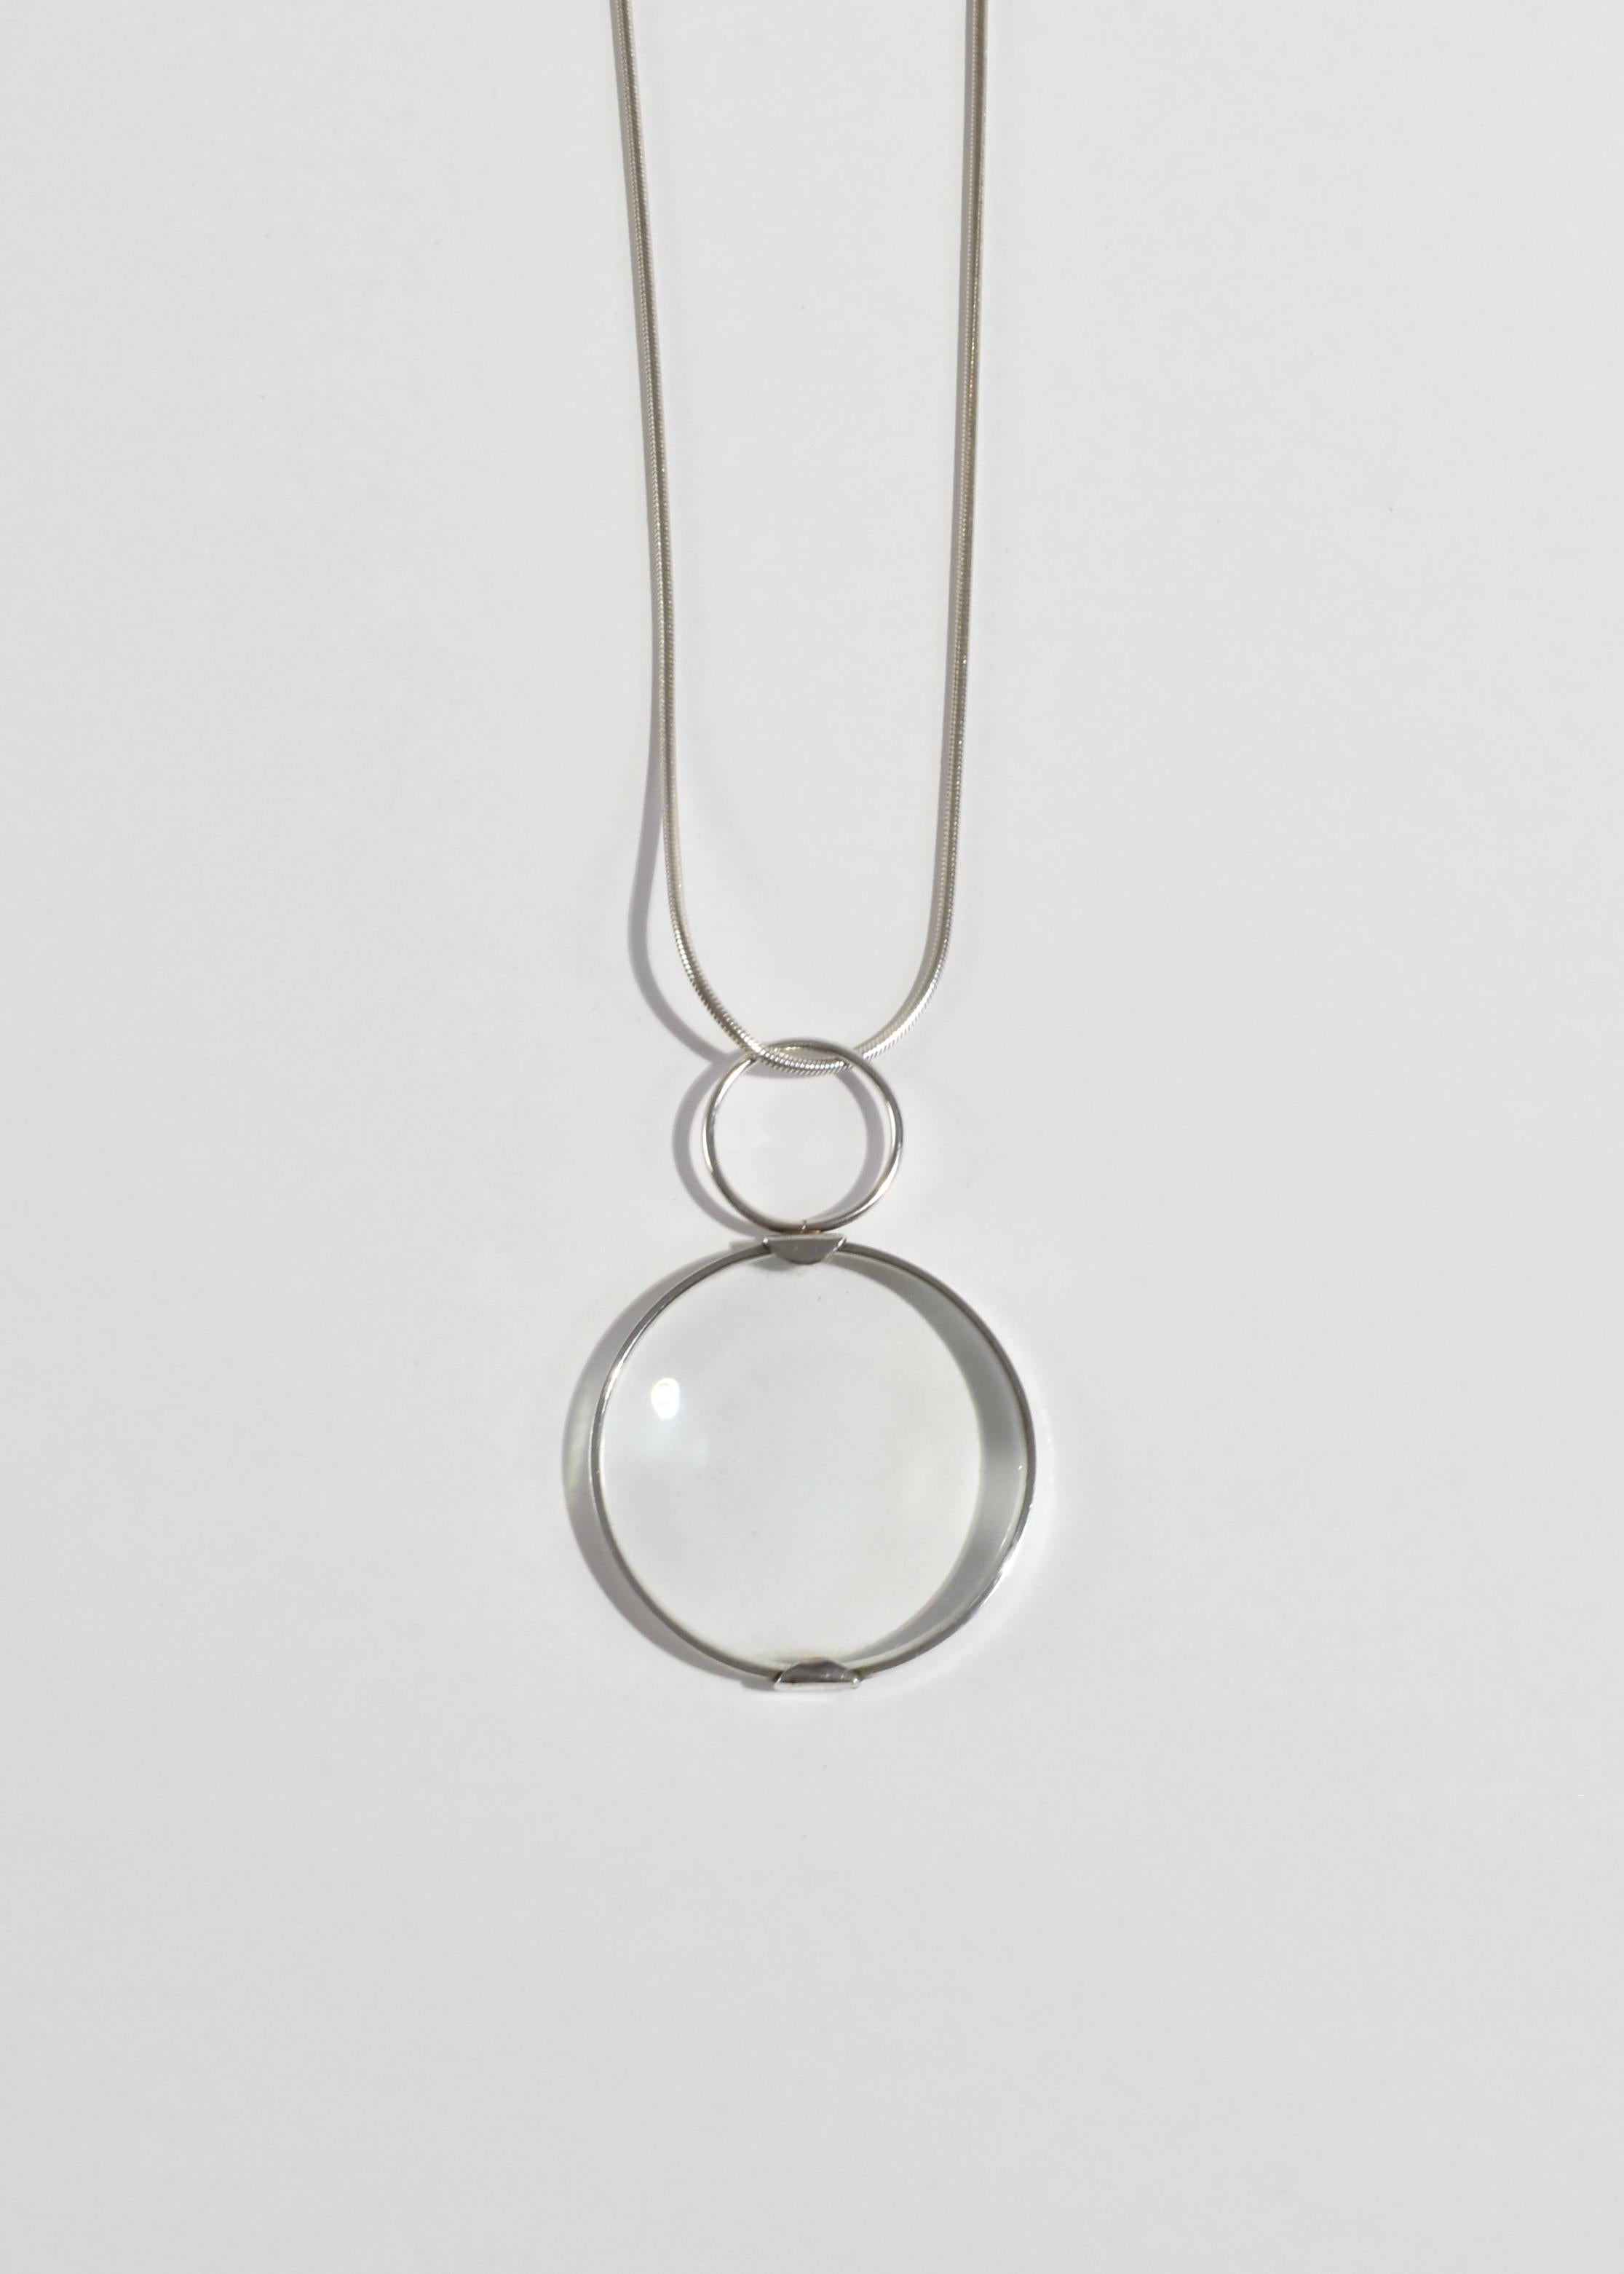 Rare vintage silver necklace with a circular magnifying glass pendant. Stamped Leonore Doskow, sterling, 1973.

Material: Sterling silver, glass.

We recommend storing in a dry place and periodic polishing with a cloth.